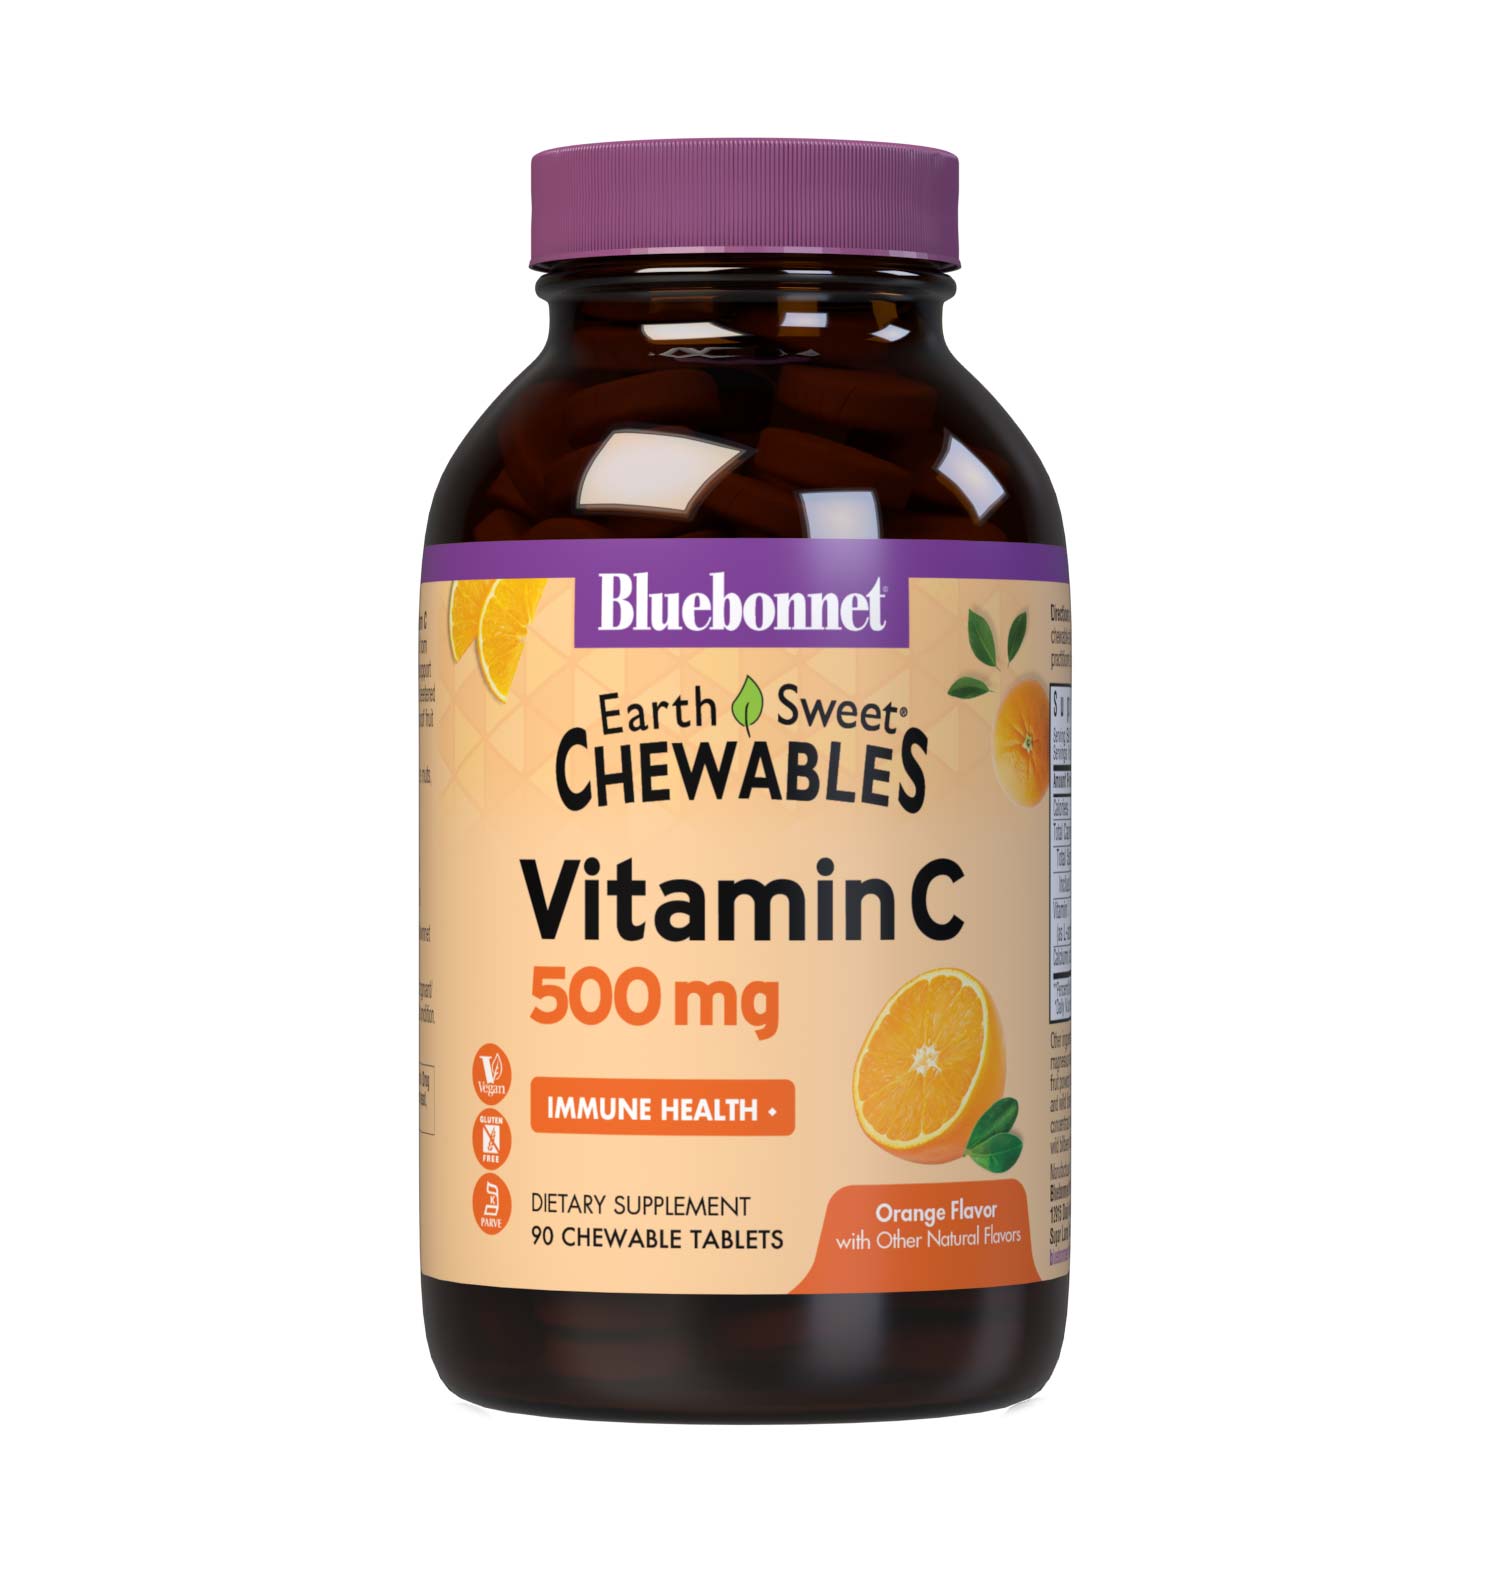 Bluebonnet’s EarthSweet Chewables Vitamin C 500 mg 90 Tablets are formulated with vitamin C from L-ascorbic acid and calcium ascorbate to help support immune function in a delicious orange flavor. Sweetened with EarthSweet, a proprietary sweetening mix of juice powders and sugar cane crystals. #size_90 count